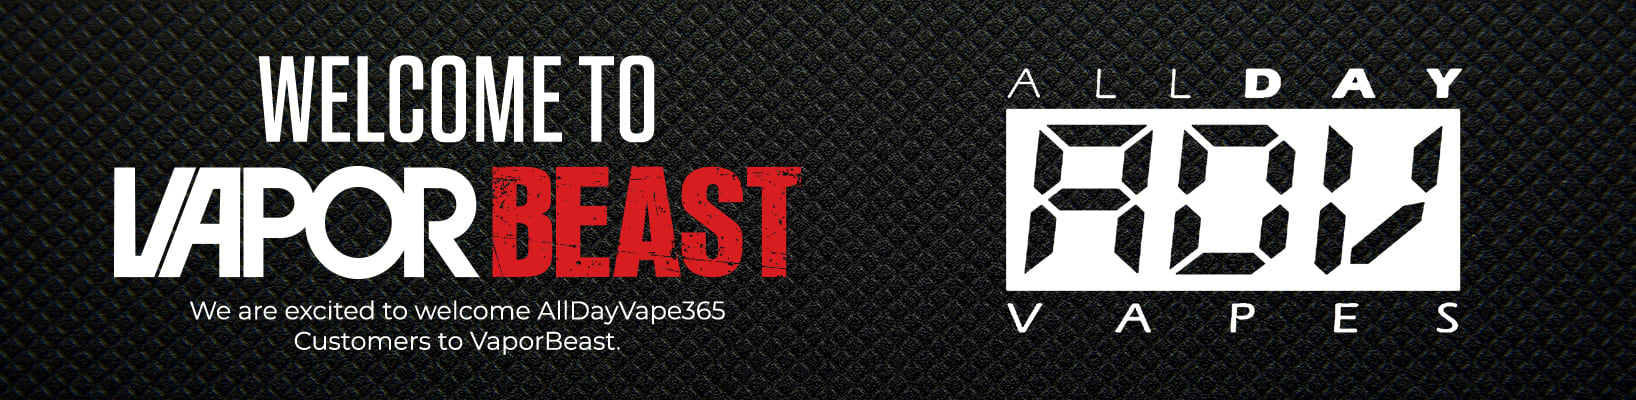 All Day Vapes is now part of VaporBeast